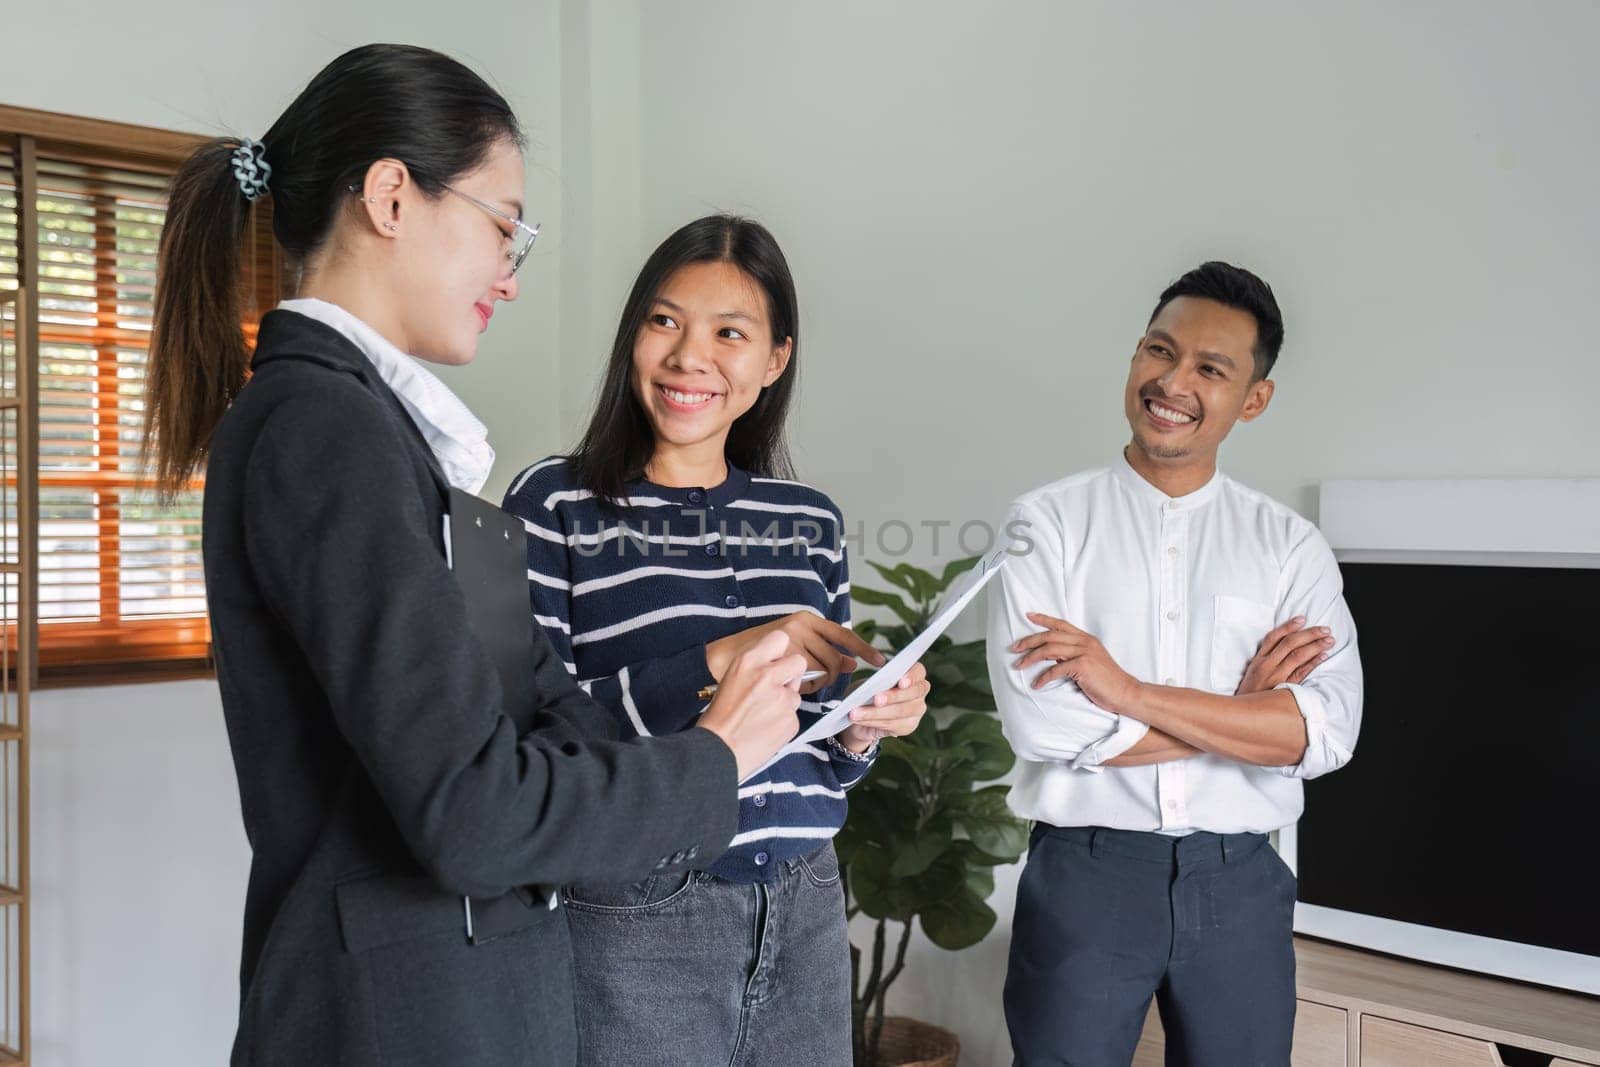 Real estate agents present and advise clients on the decision to sign a home purchase agreement form. Offering mortgage loans and home insurance.